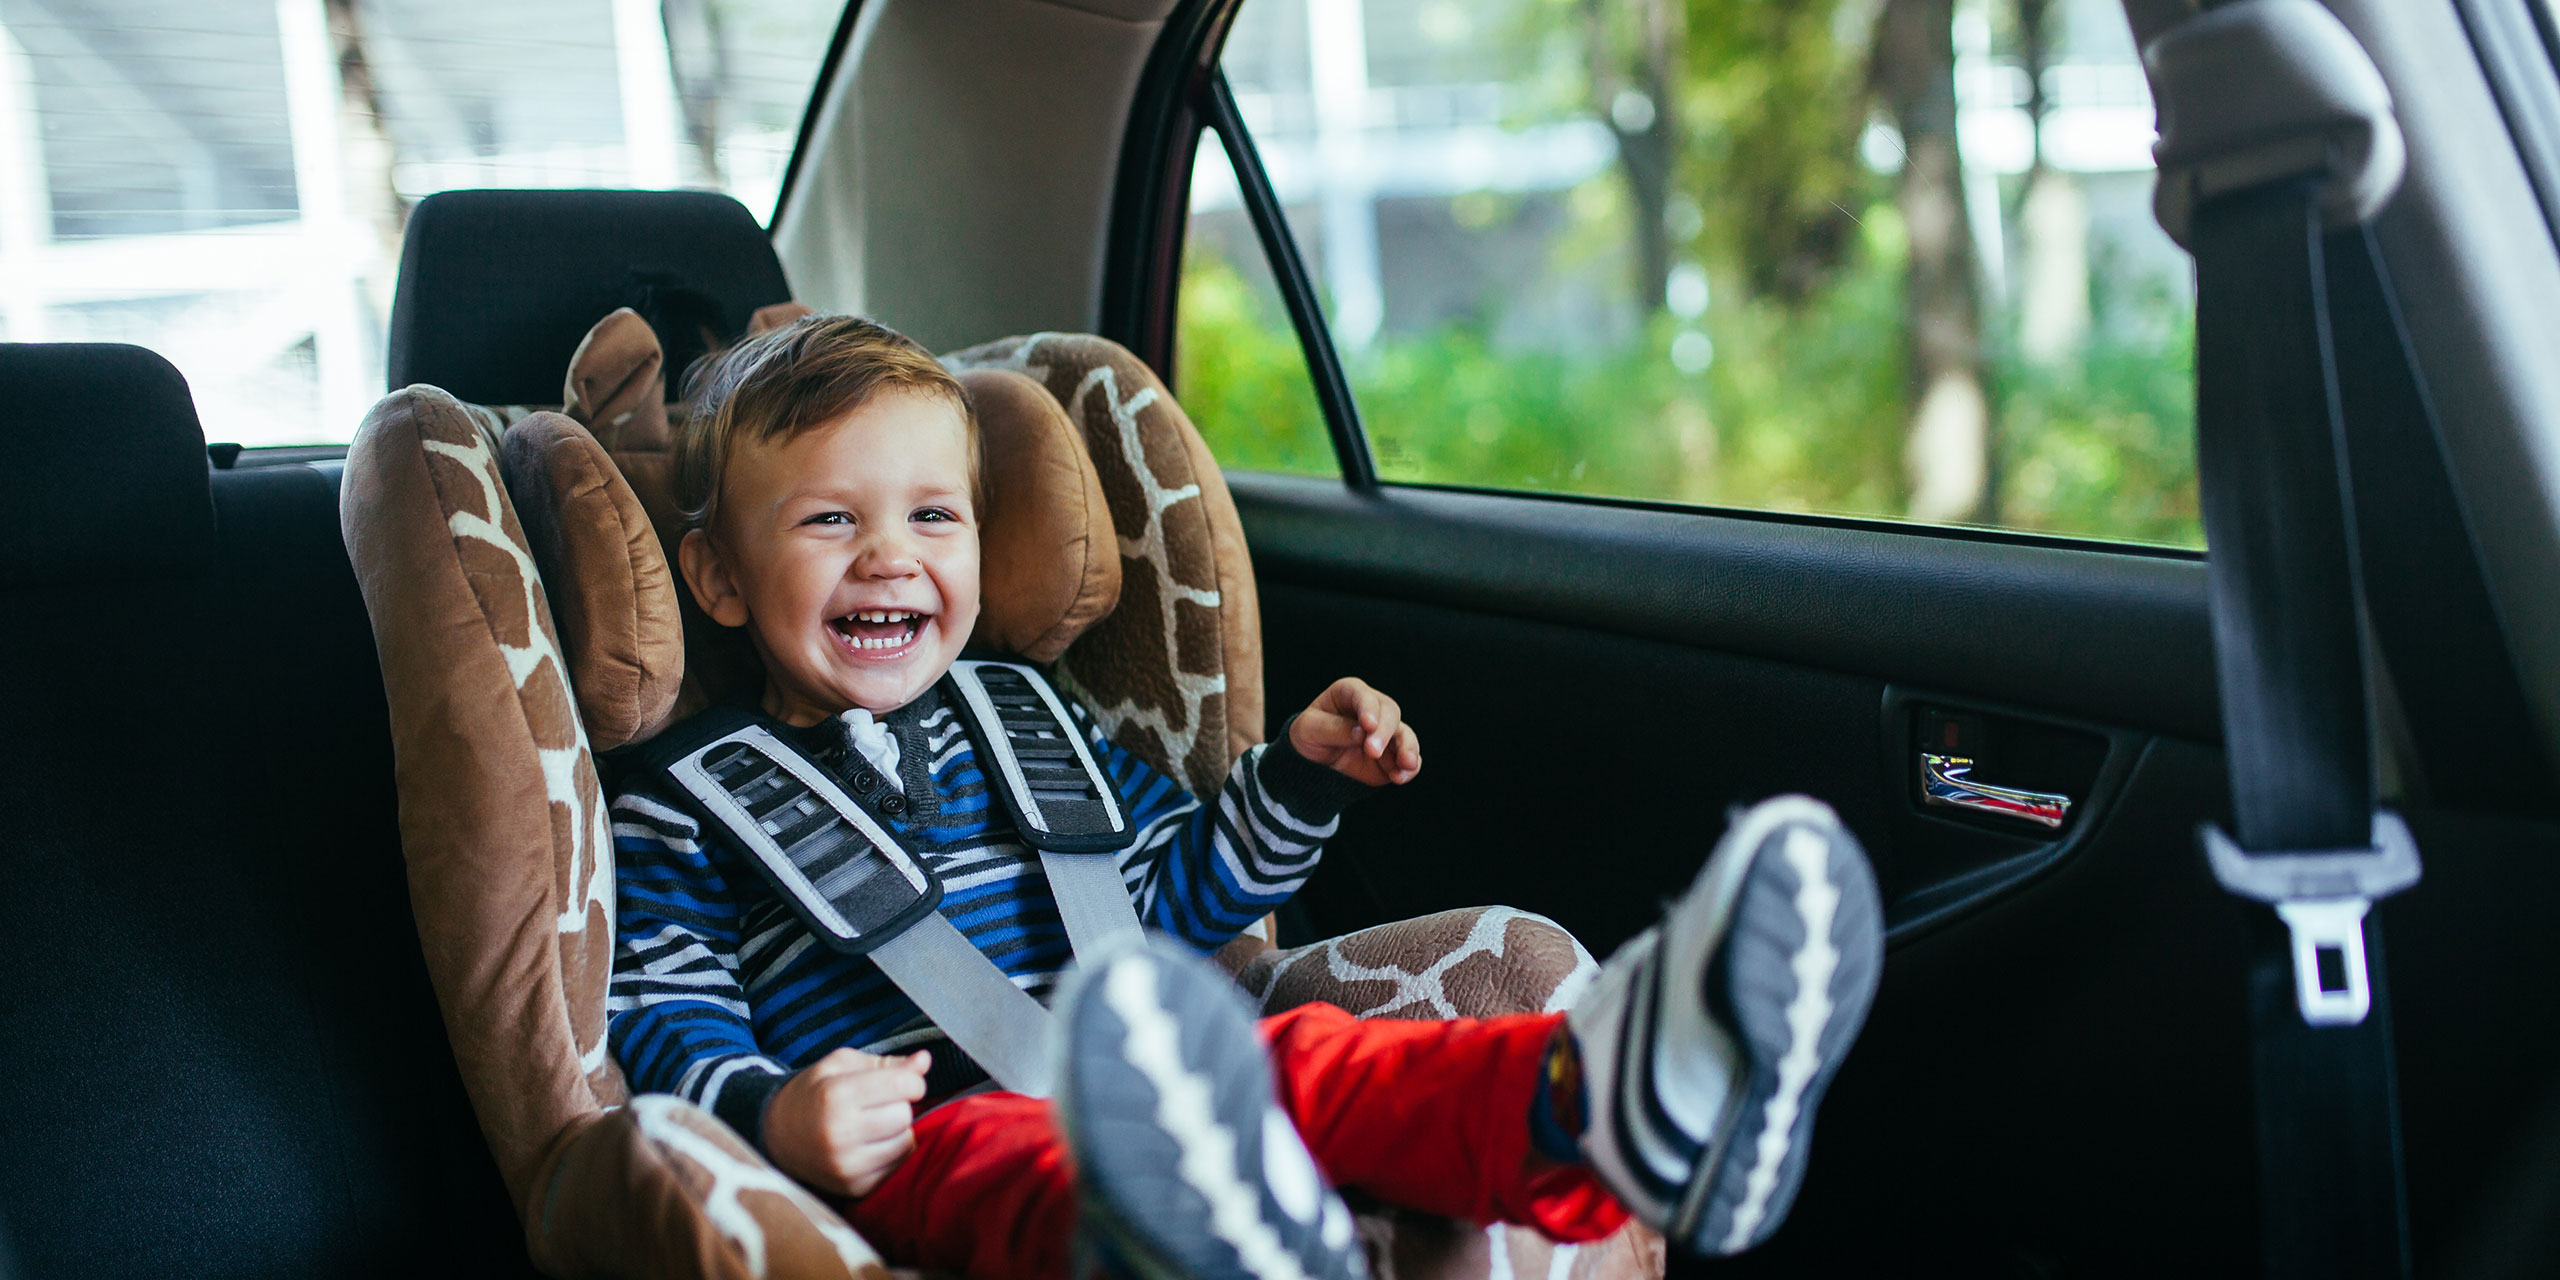 best car seat for travel 2019